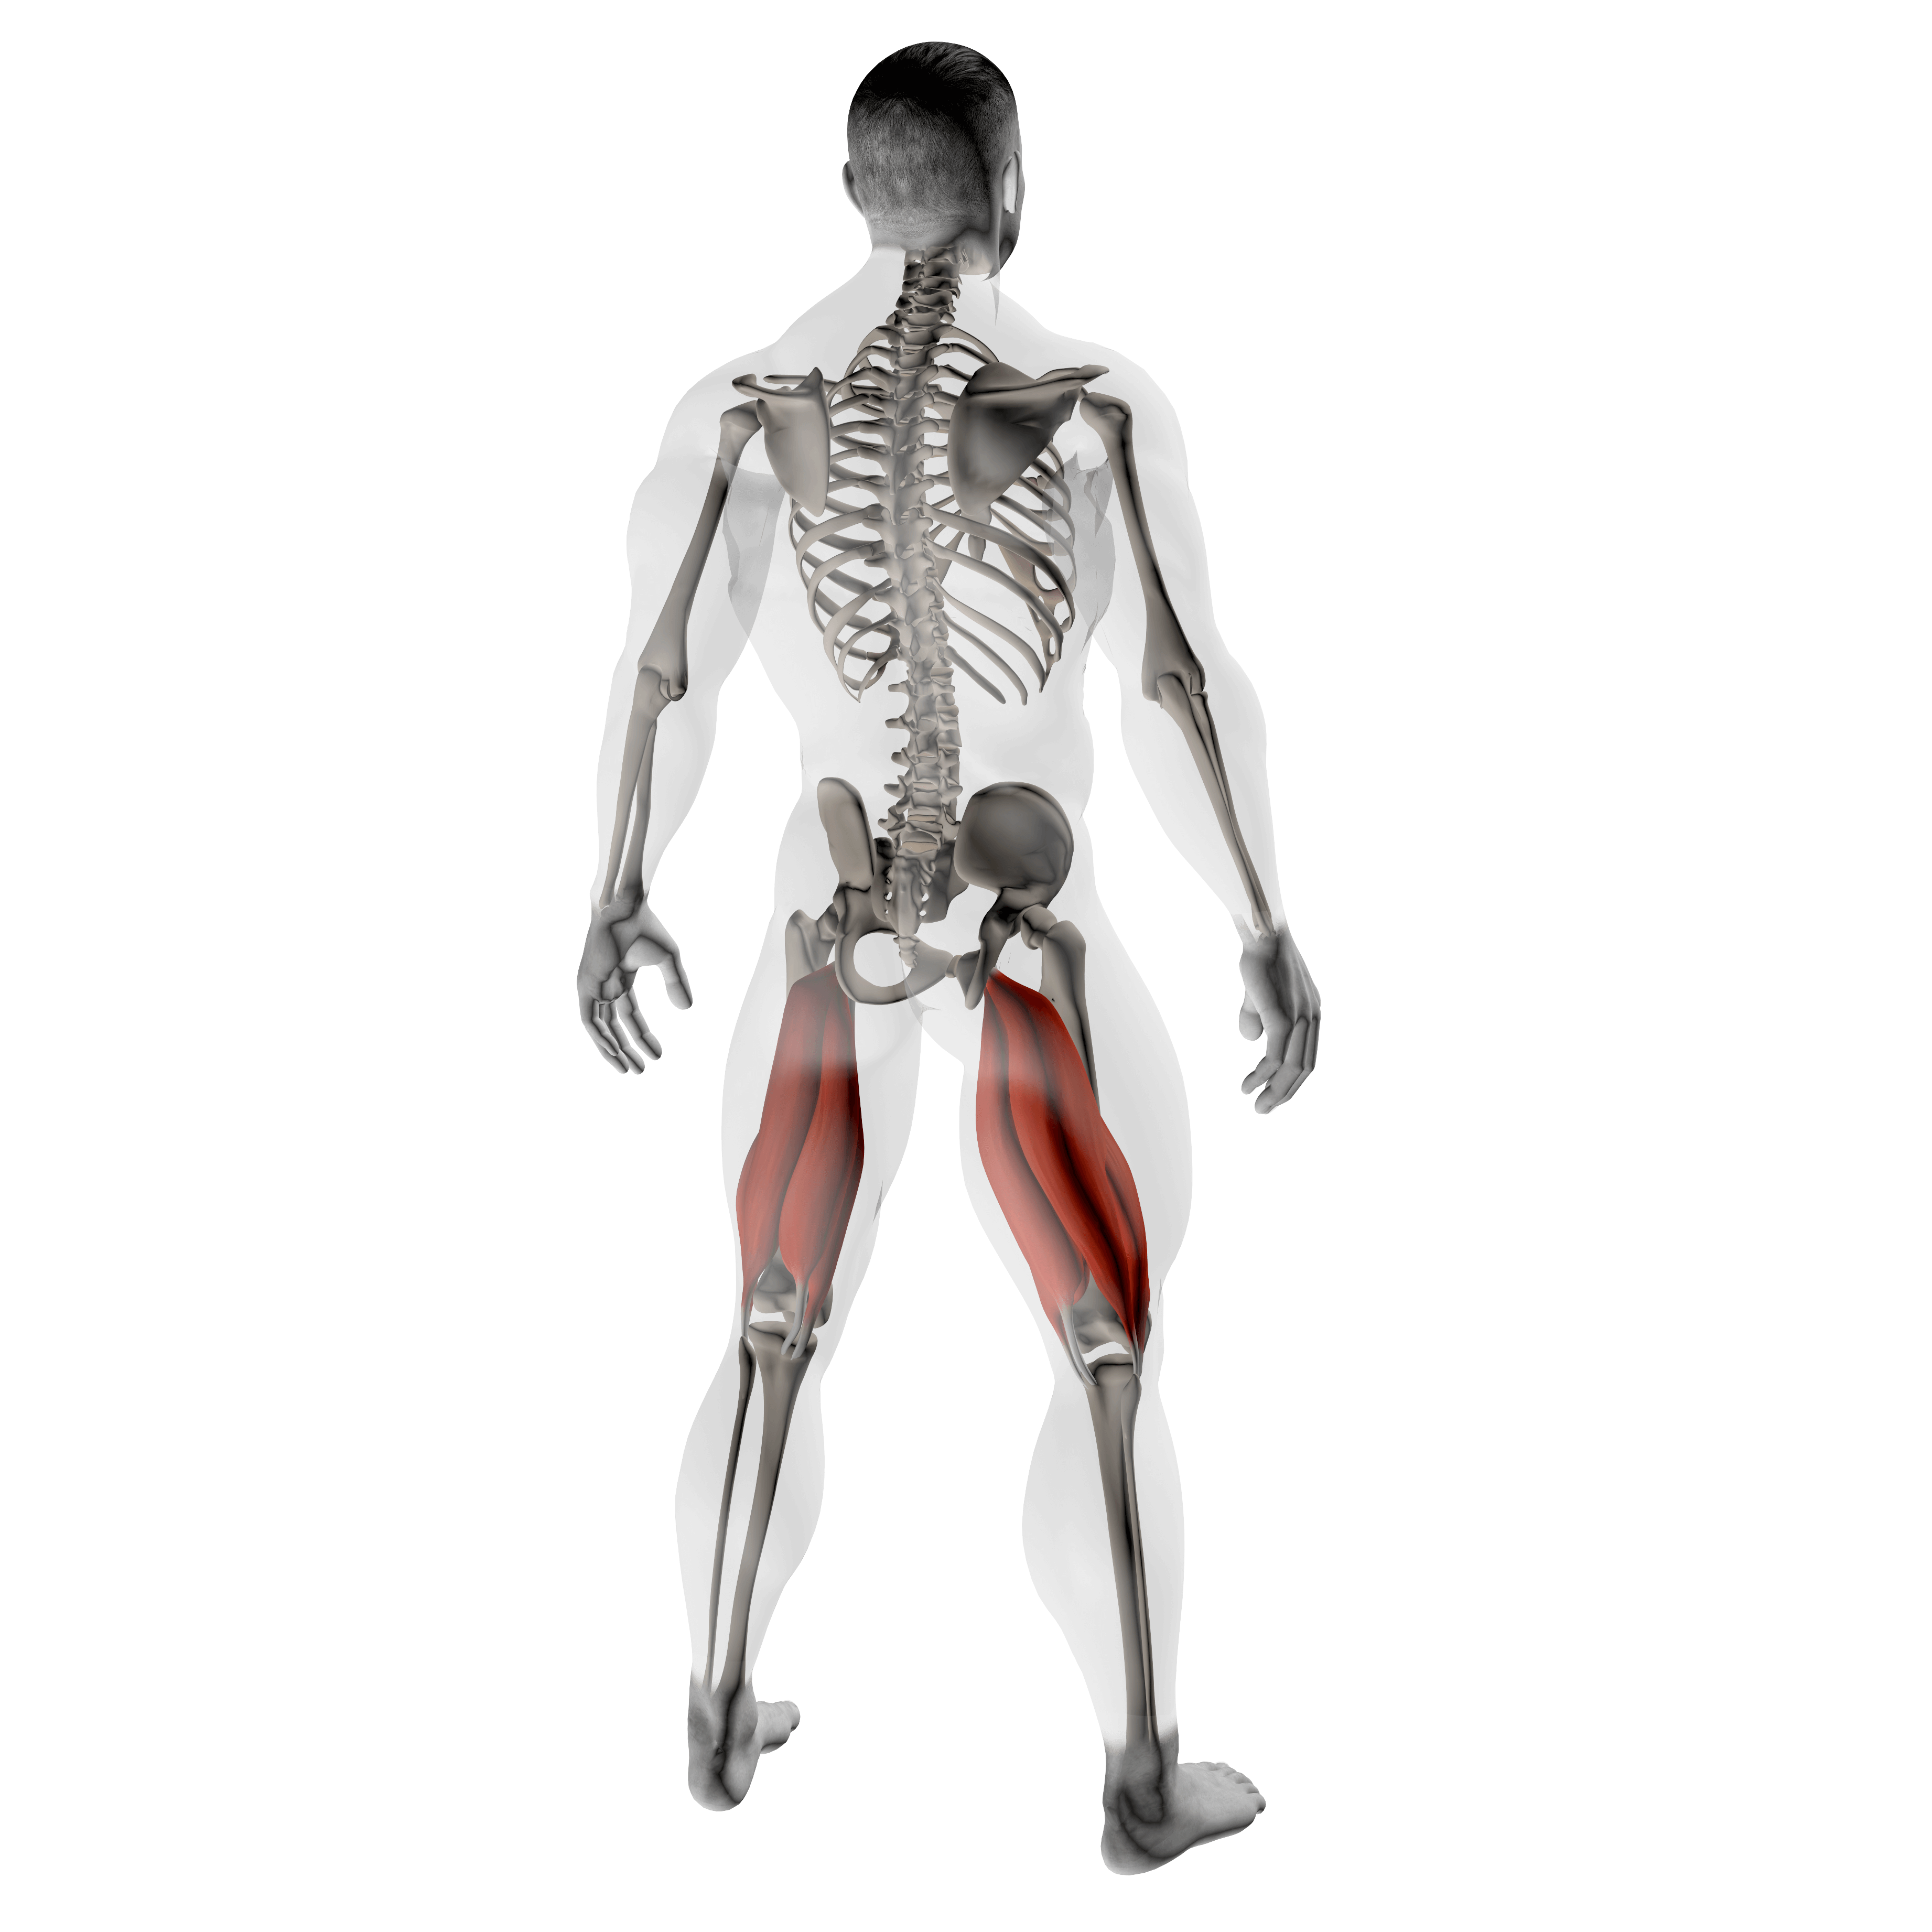 x-ray illustration showing hamstrings to demonstrate what muscles squats work